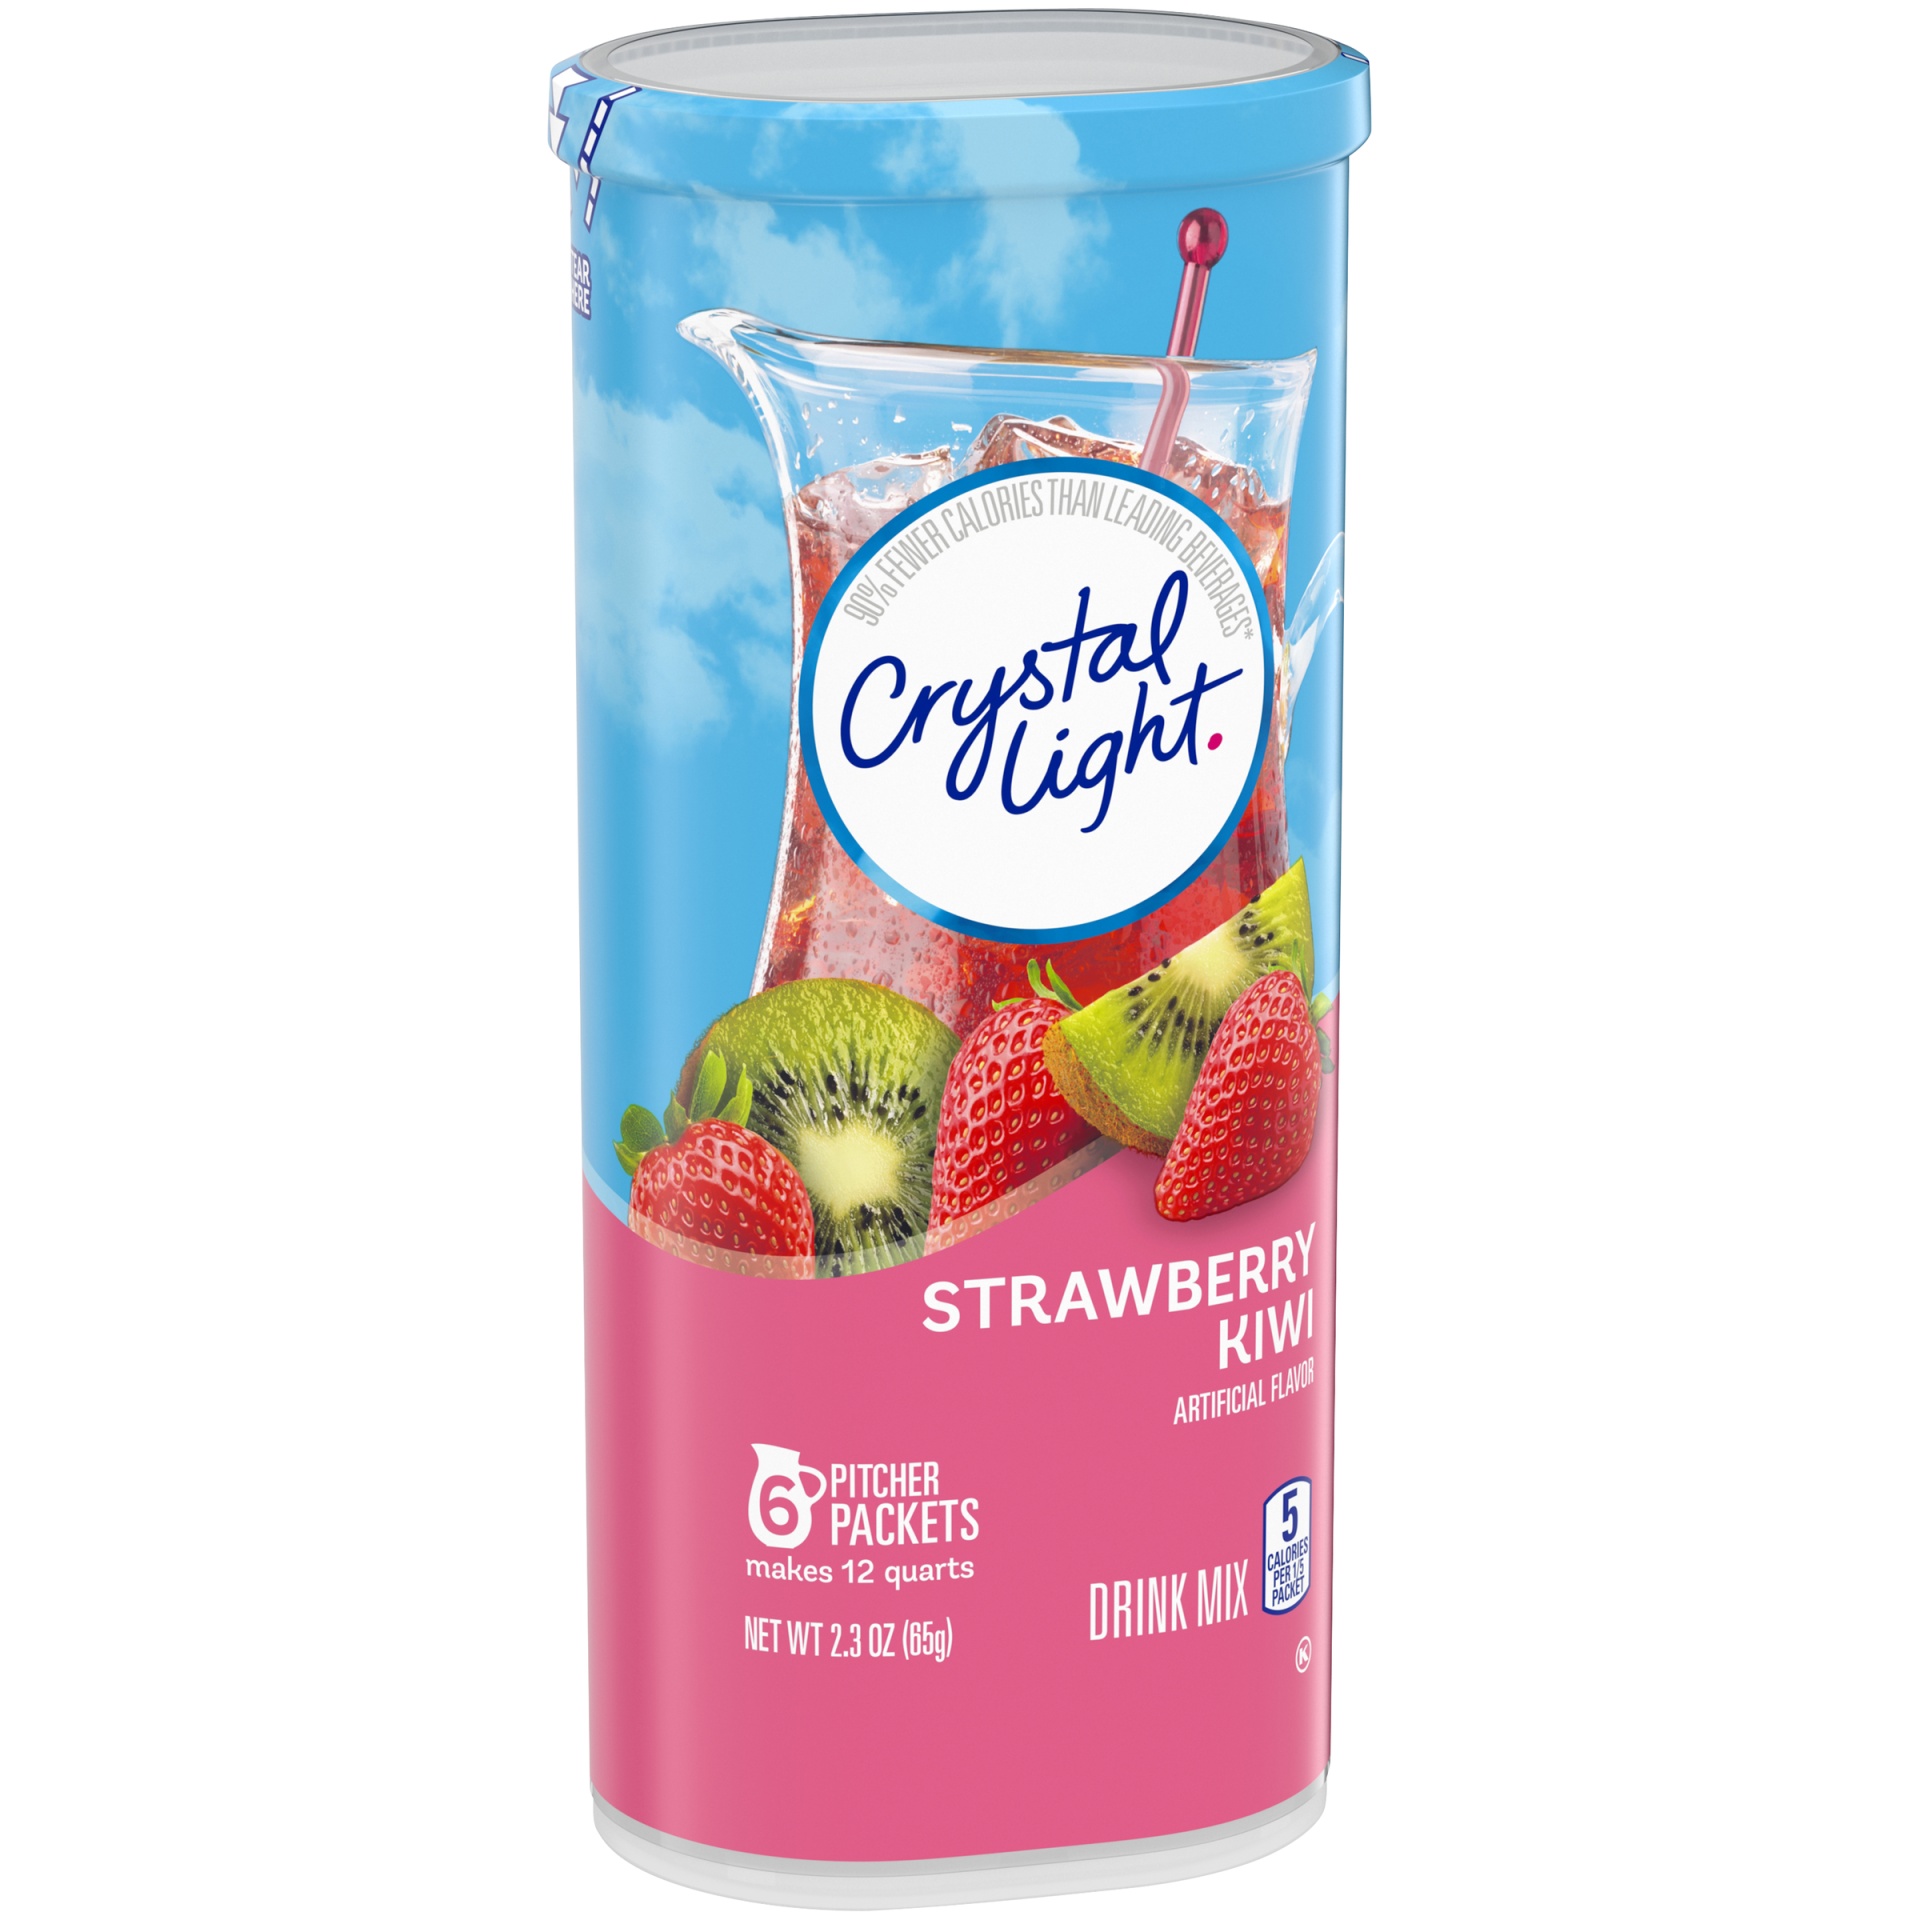 slide 2 of 6, Crystal Light Strawberry Kiwi Artificially Flavored Powdered Drink Mix Pitcher, 2.3 oz